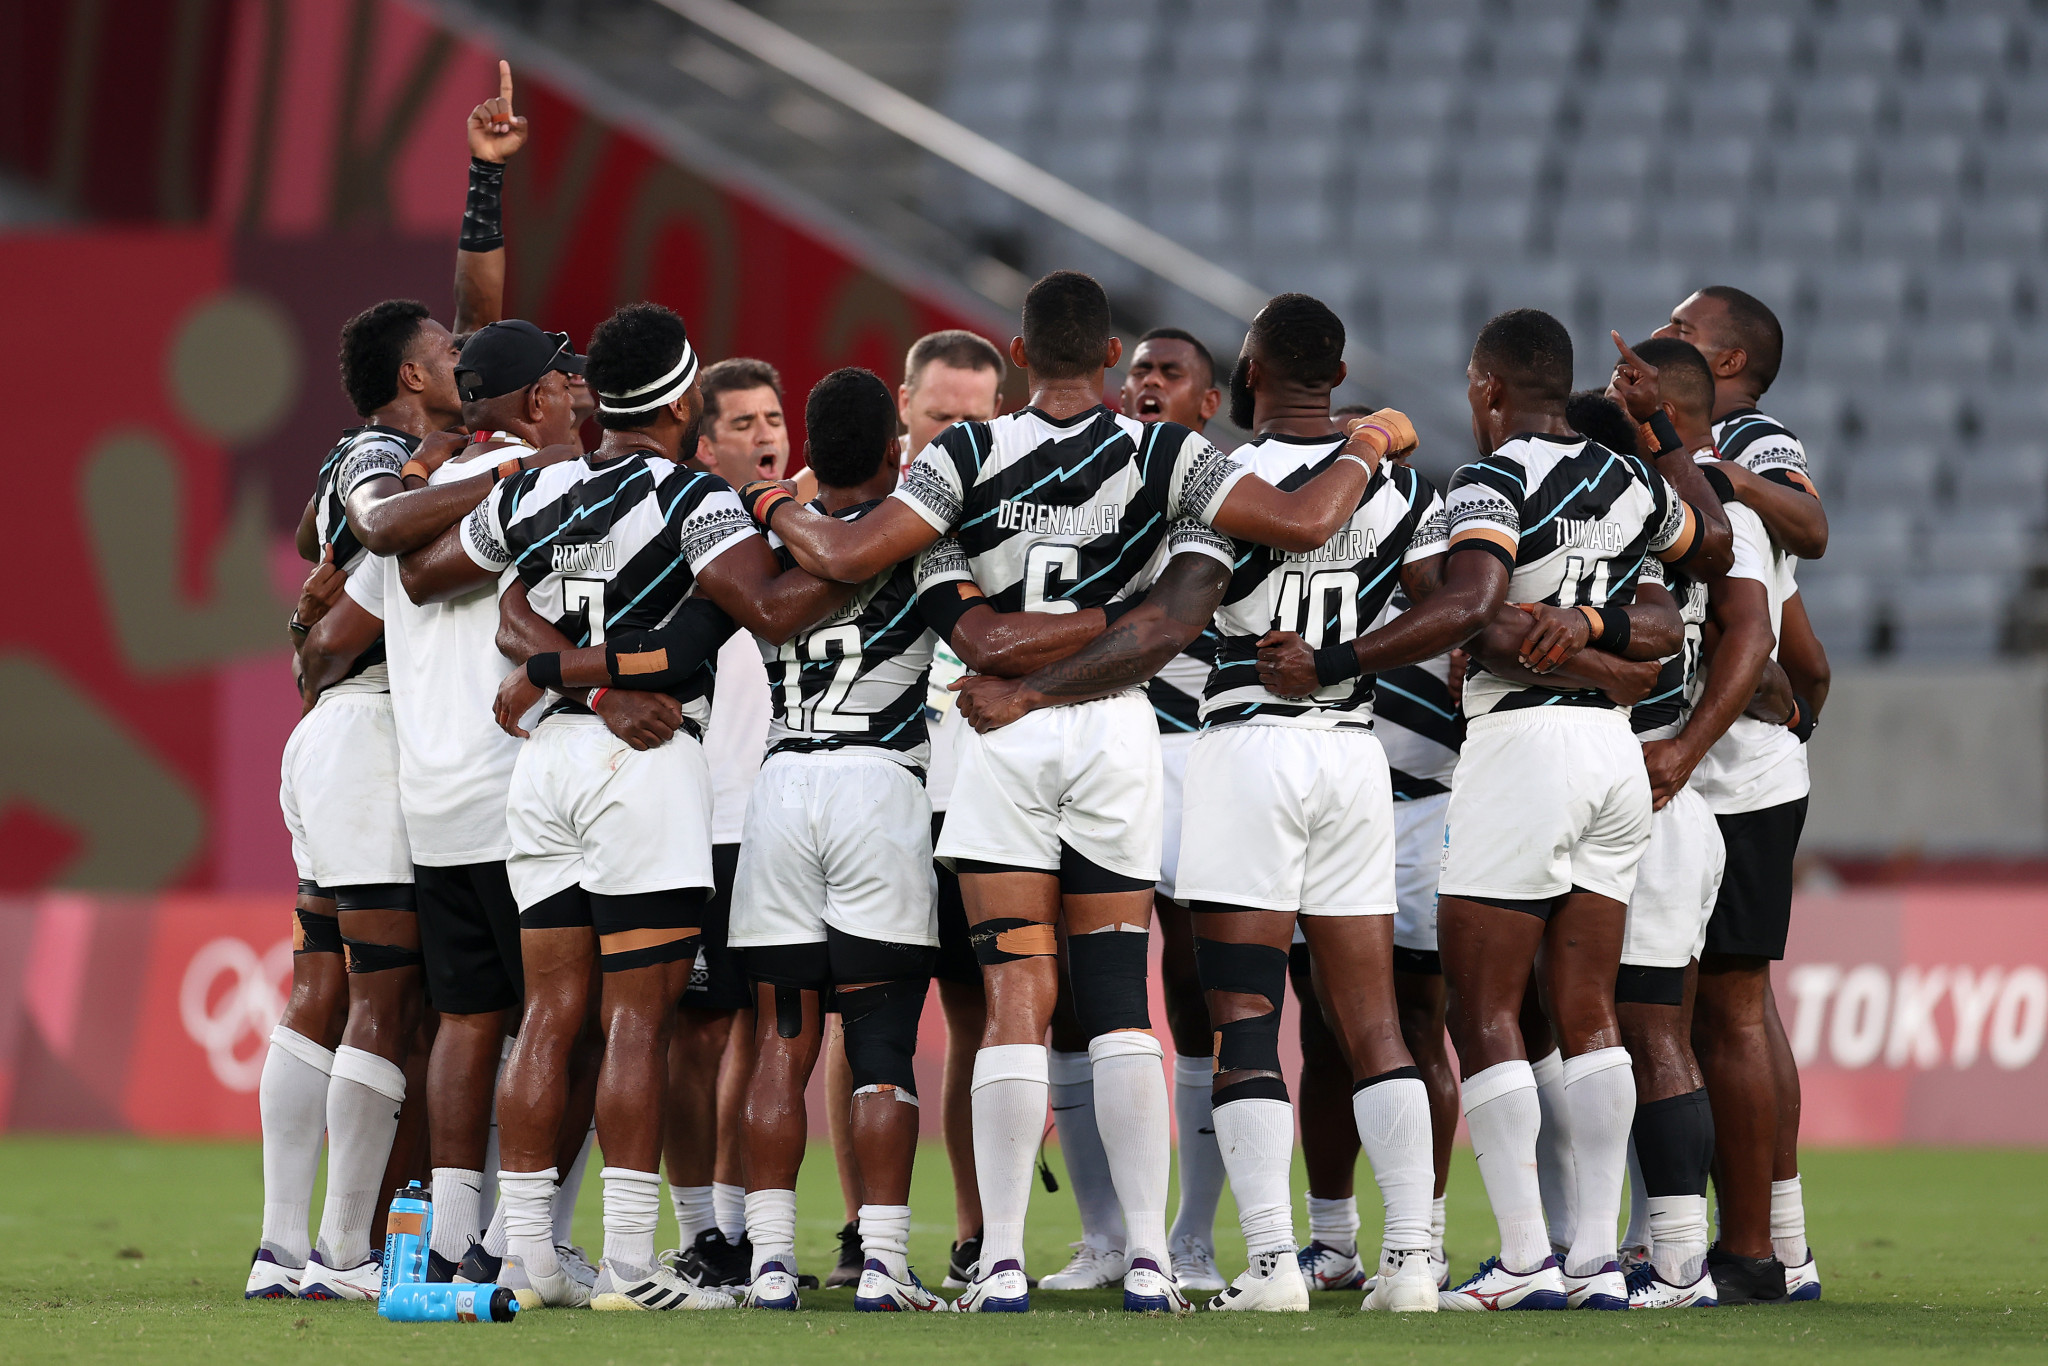 Men's Olympic champions Fiji will line-up in the Dubai World Rugby Sevens Series, but women's Olympic champions New Zealand will be absent ©Getty Images